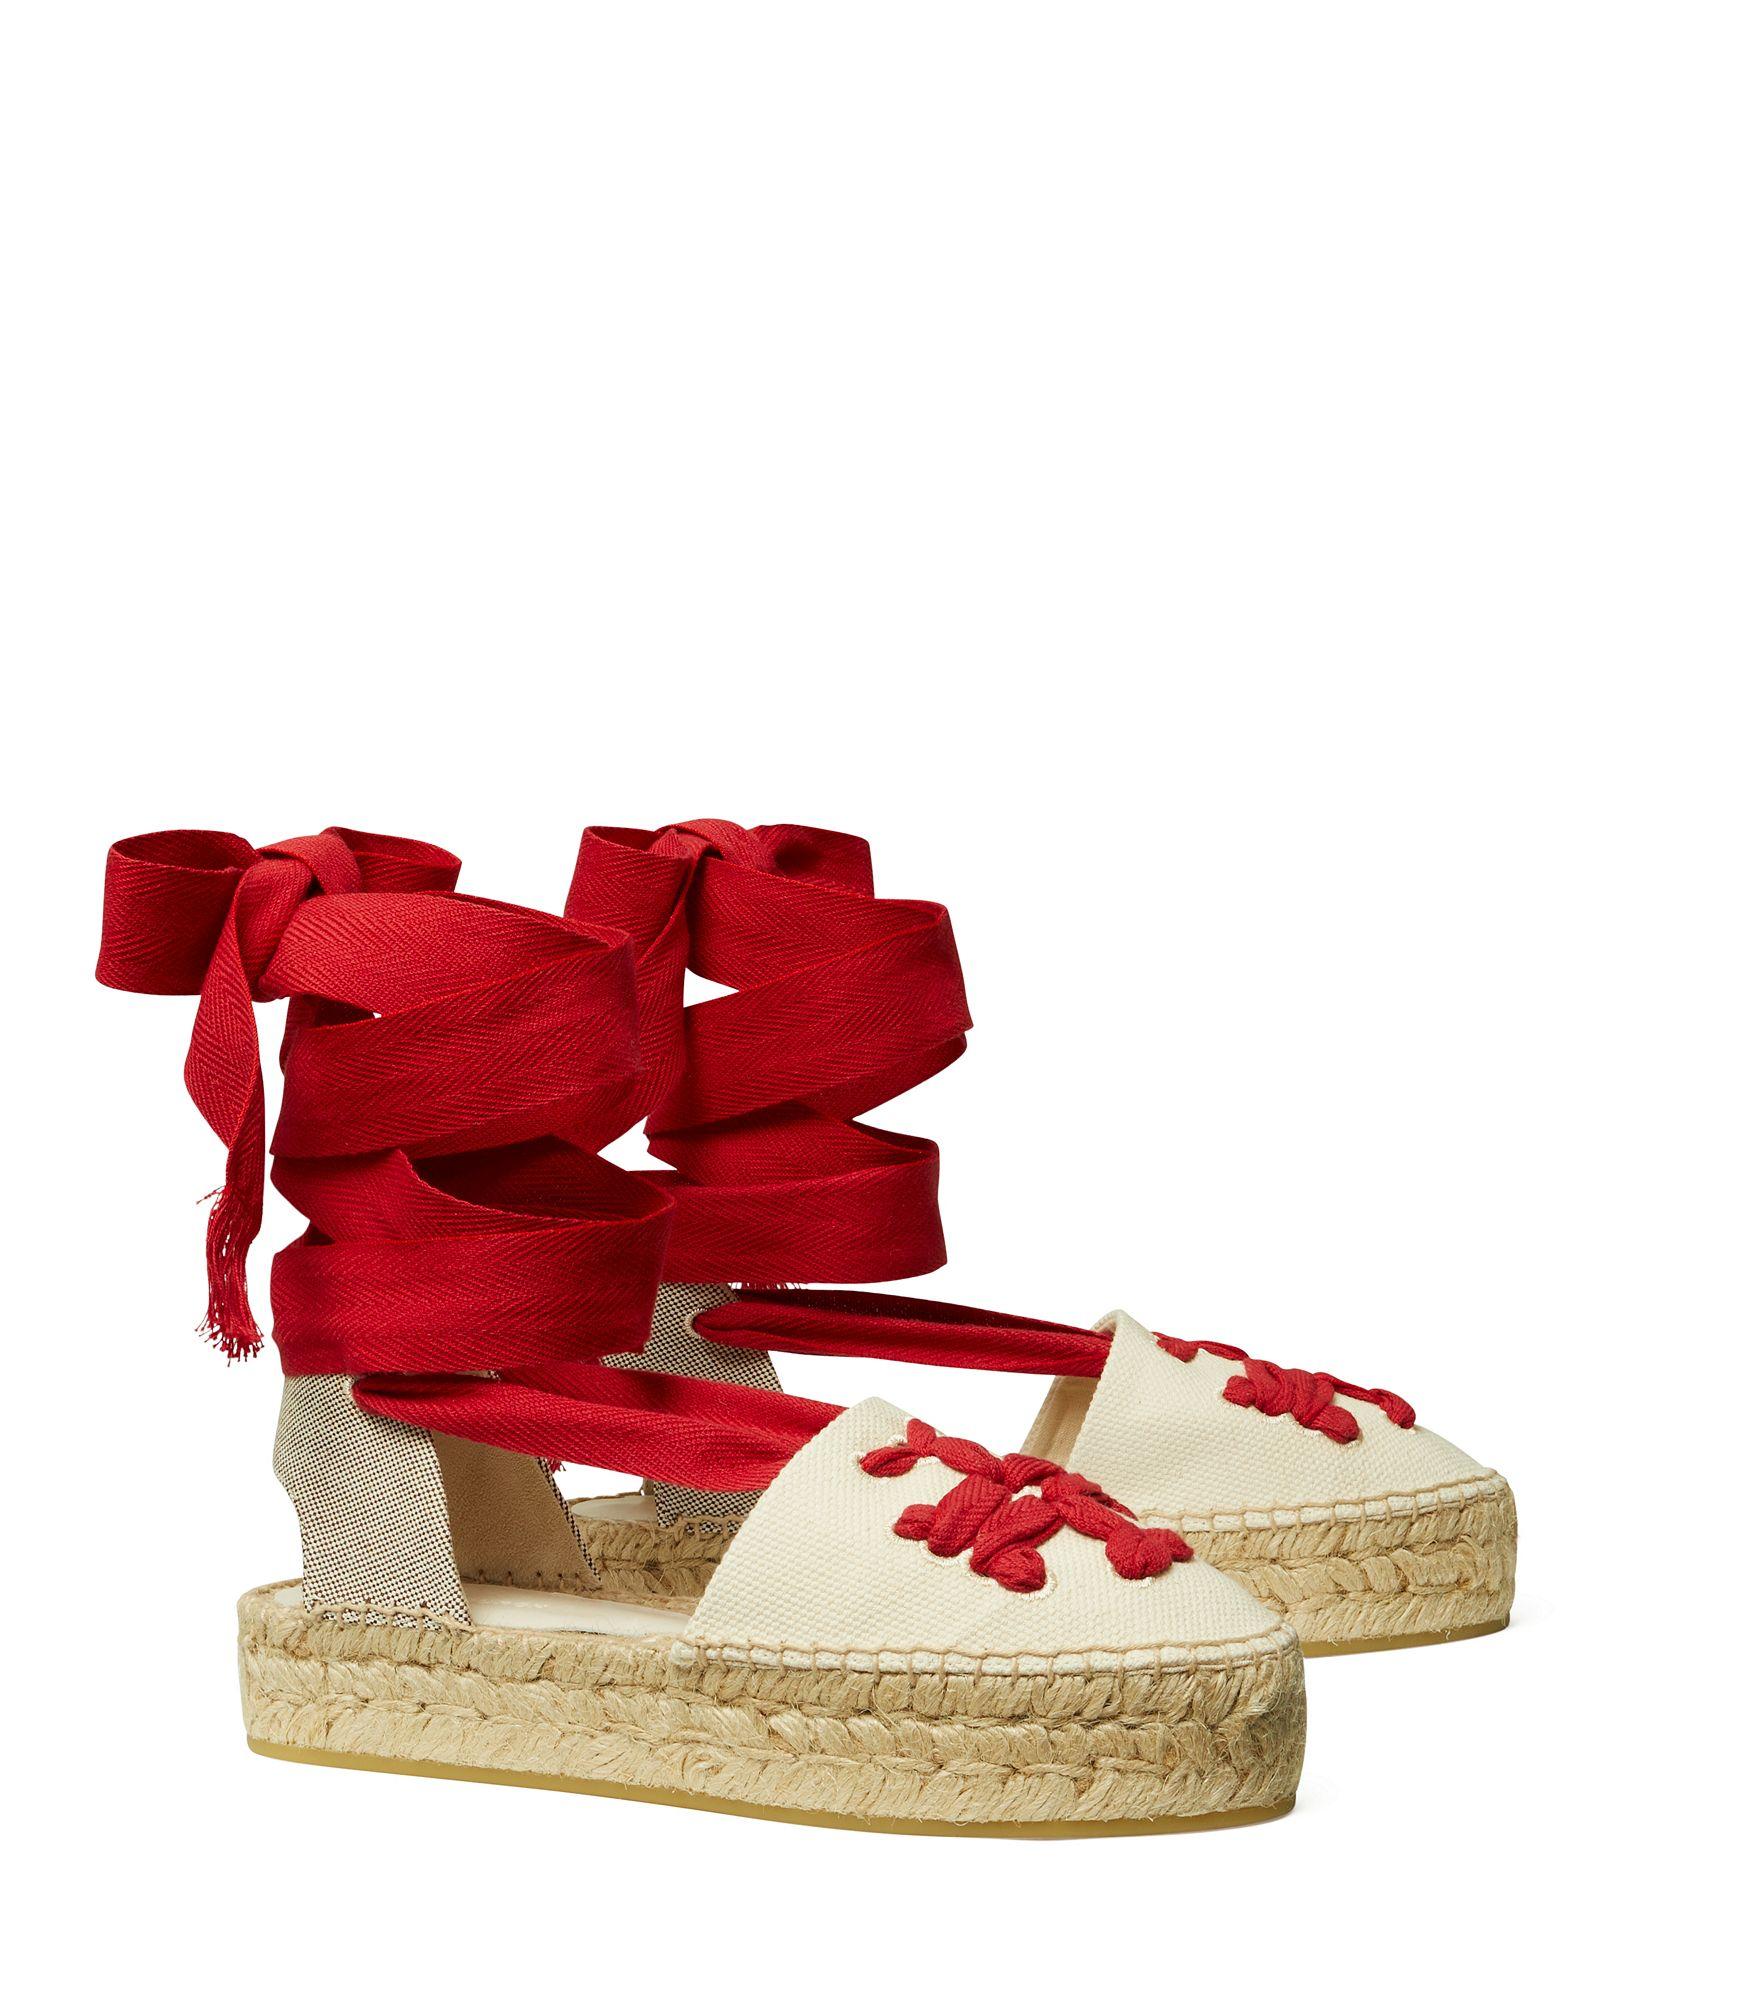 Tory Burch Woven Double T Espadrilles in Red | Lyst